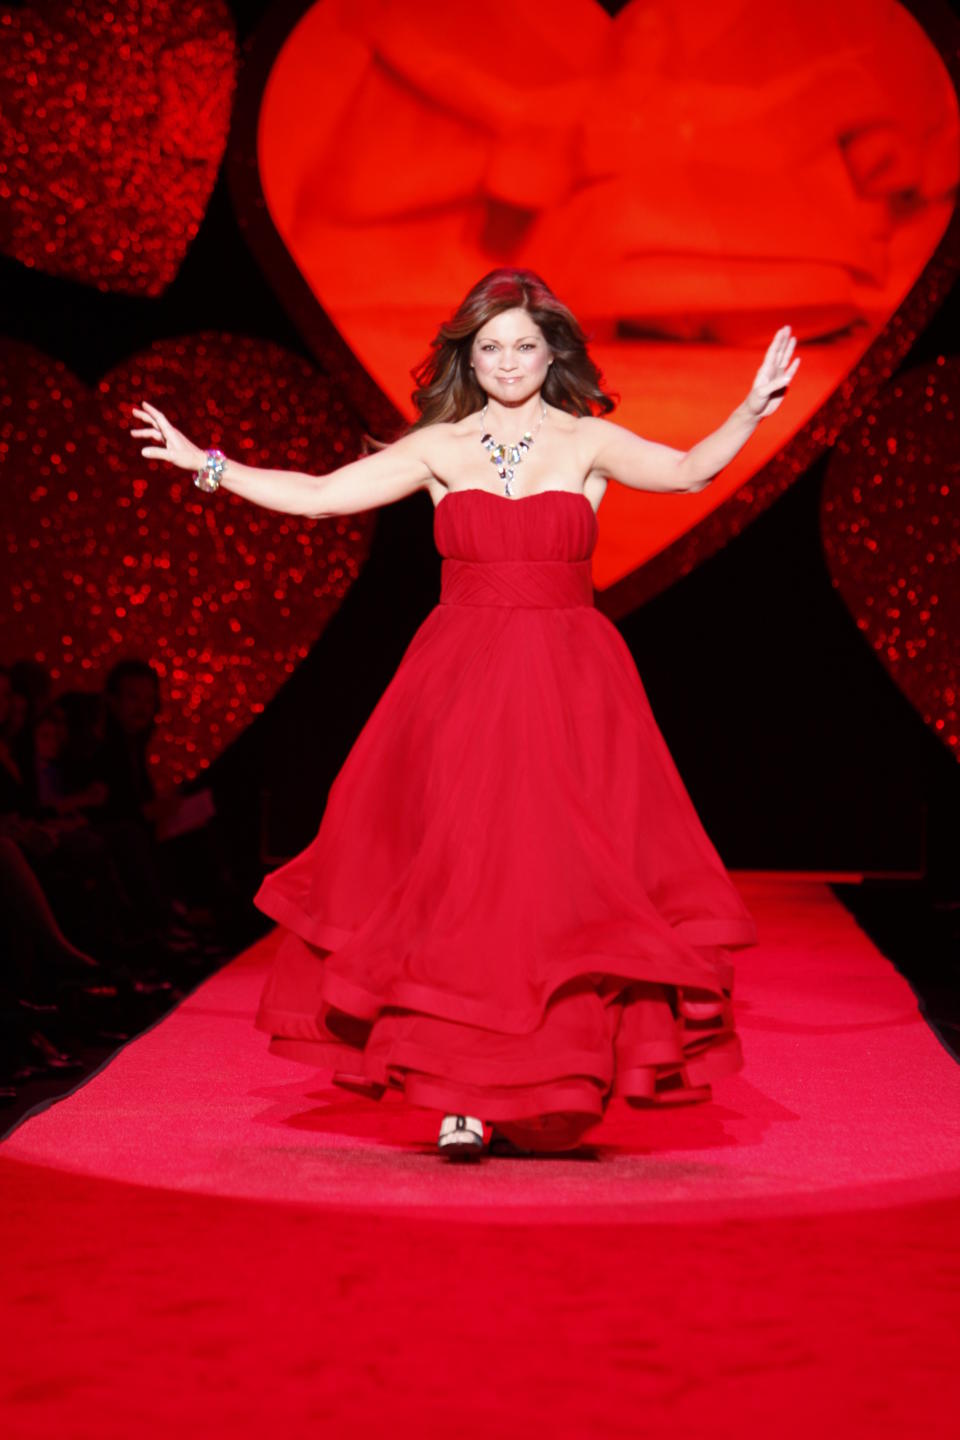 Valerie Bertinelli on the runway at the Fall 2009 Heart Truth show at Bryant Park in New York City. (Photo by John Aquino/WWD/Penske Media via Getty Images)